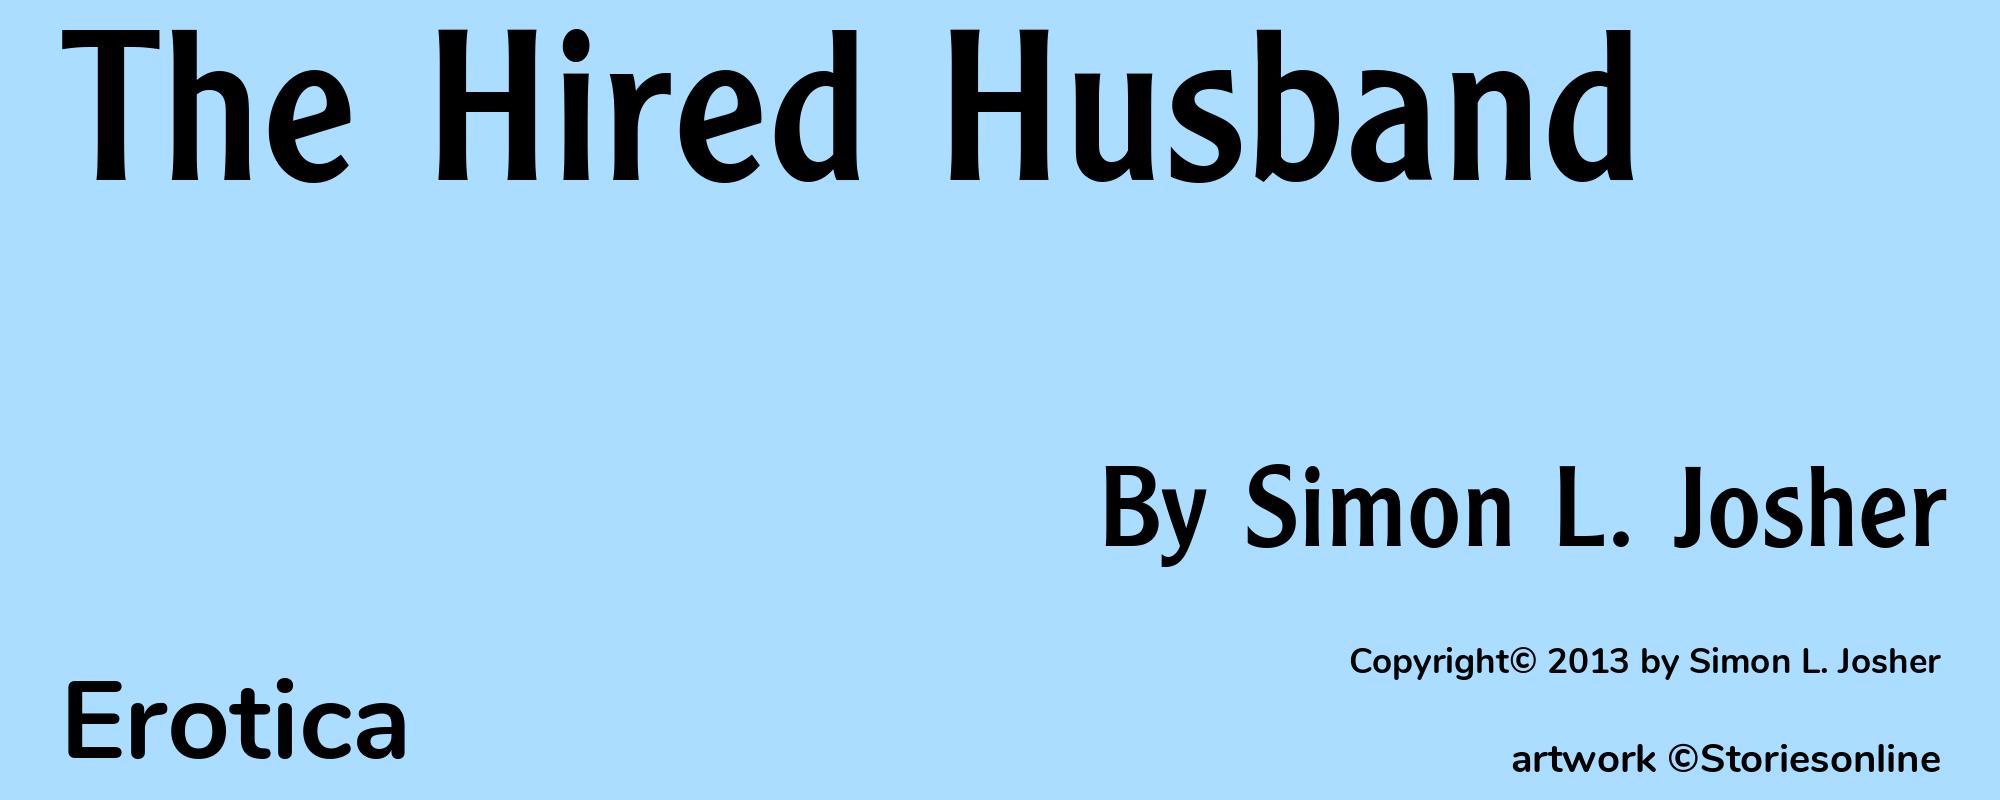 The Hired Husband - Cover